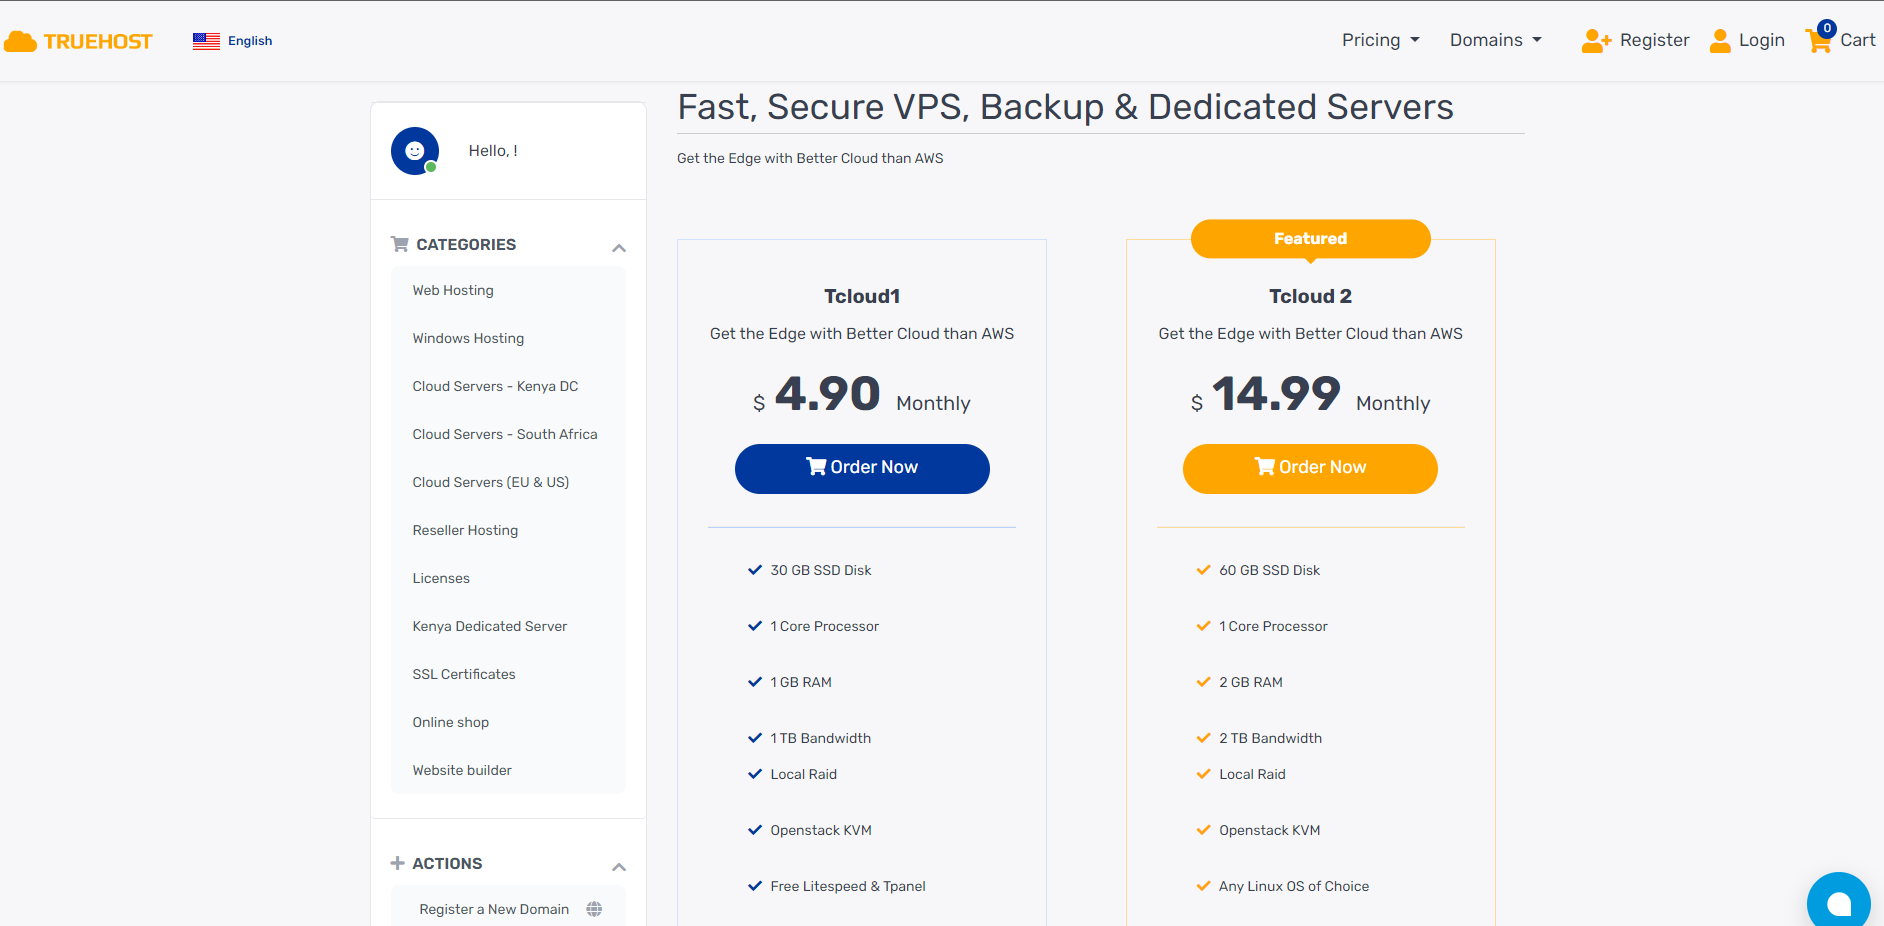 Truehost main page and price.